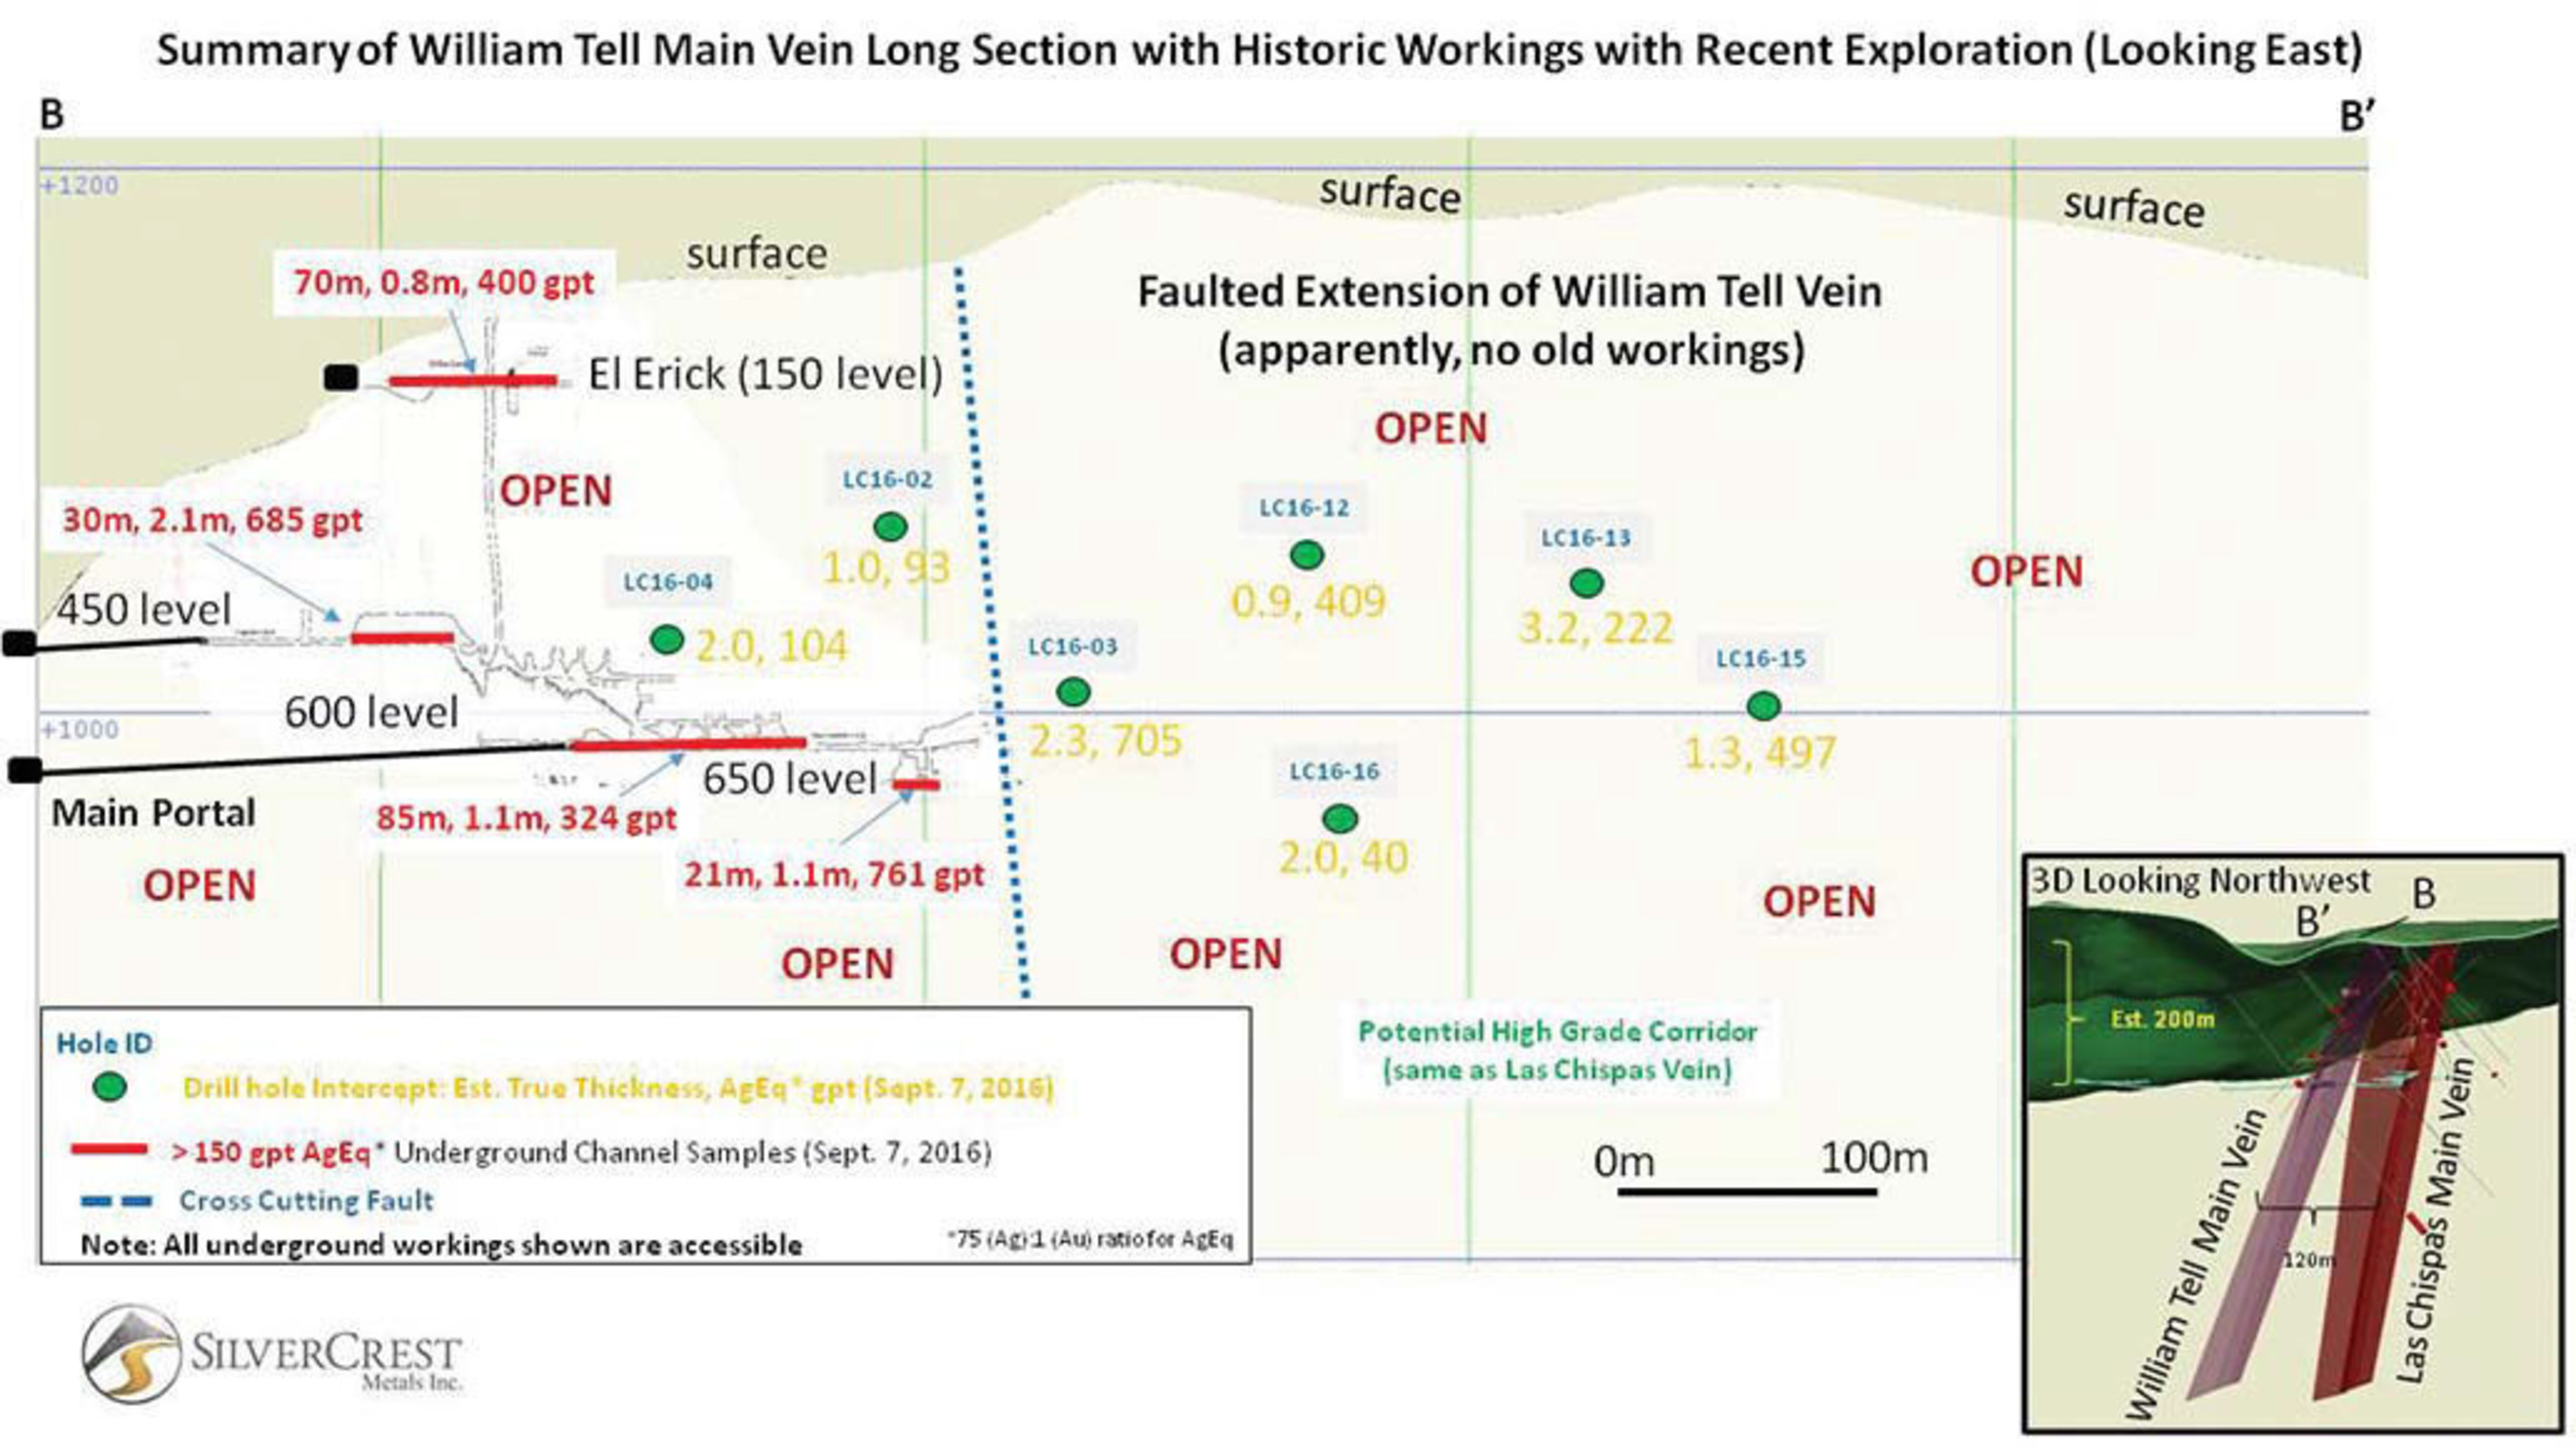 SilverCrest Metals Inc. Sonora Mexico - Las Chispas Project Figure 3 - Summary of William Tell Main Vein Long Section with Historic Workings with Recent Exploration (Looking East)